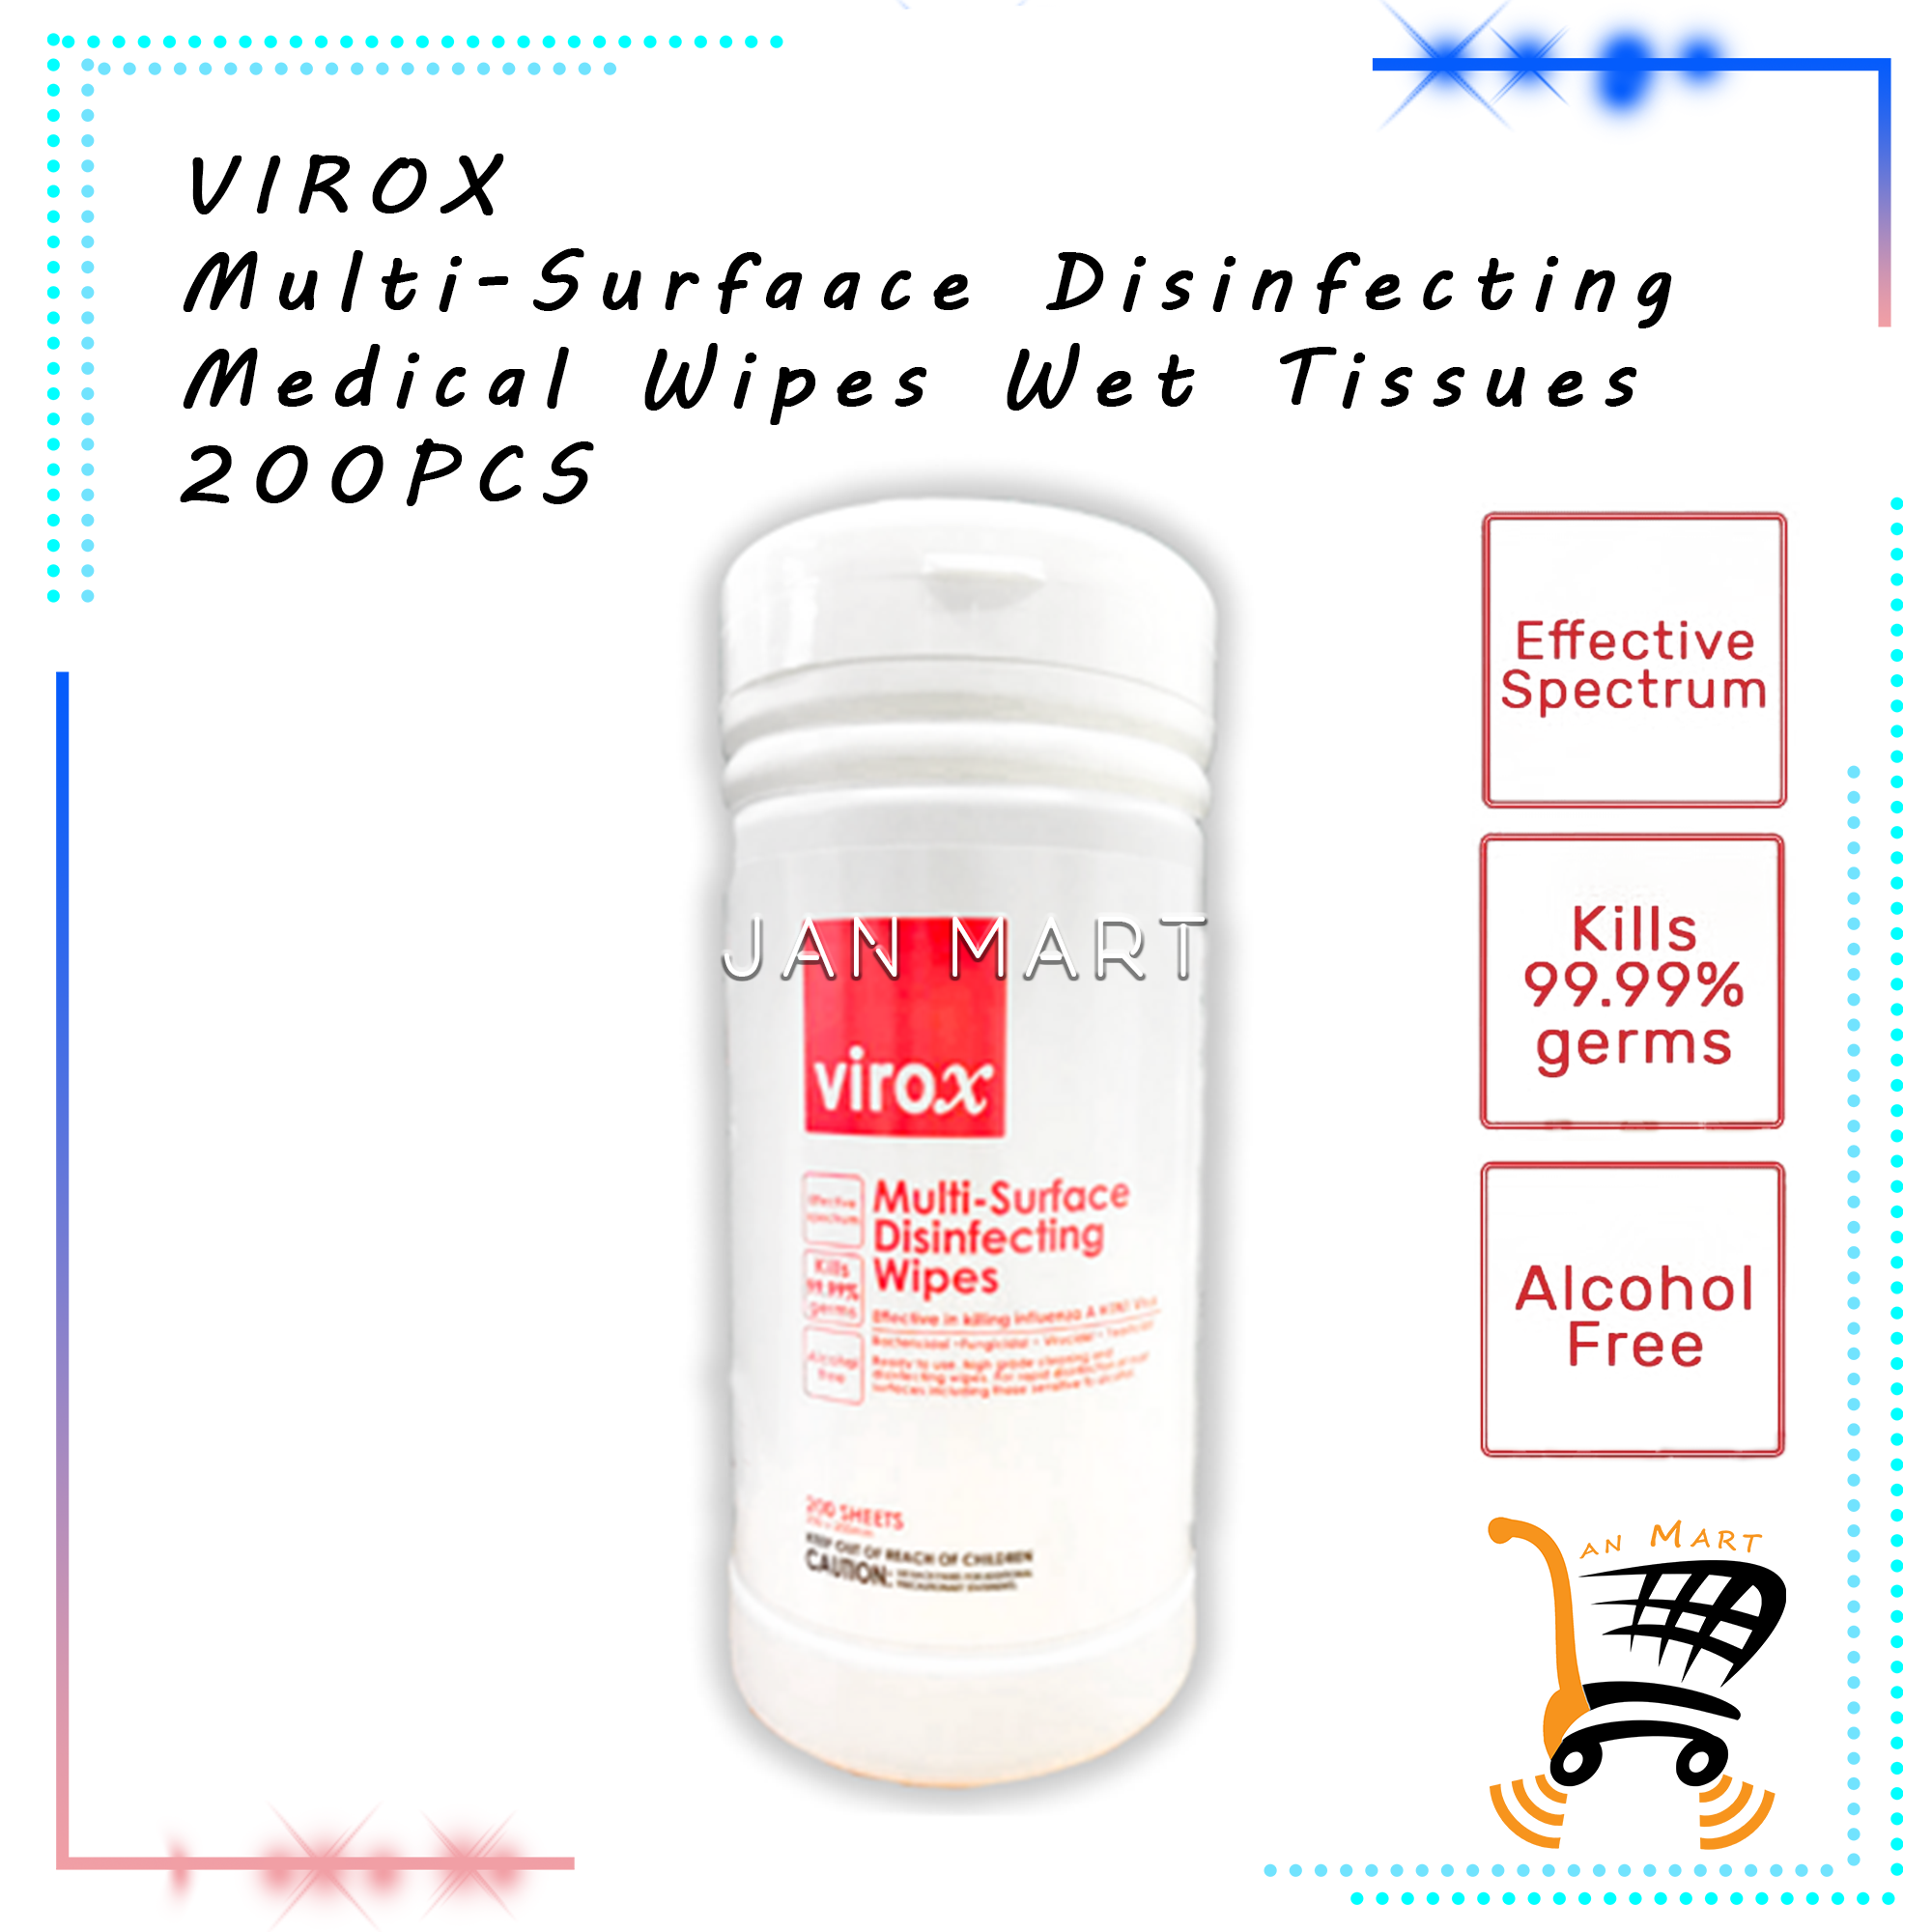 VIROX Multi-Surface Disinfecting Medical Wipes Wet Tissues 200PCS